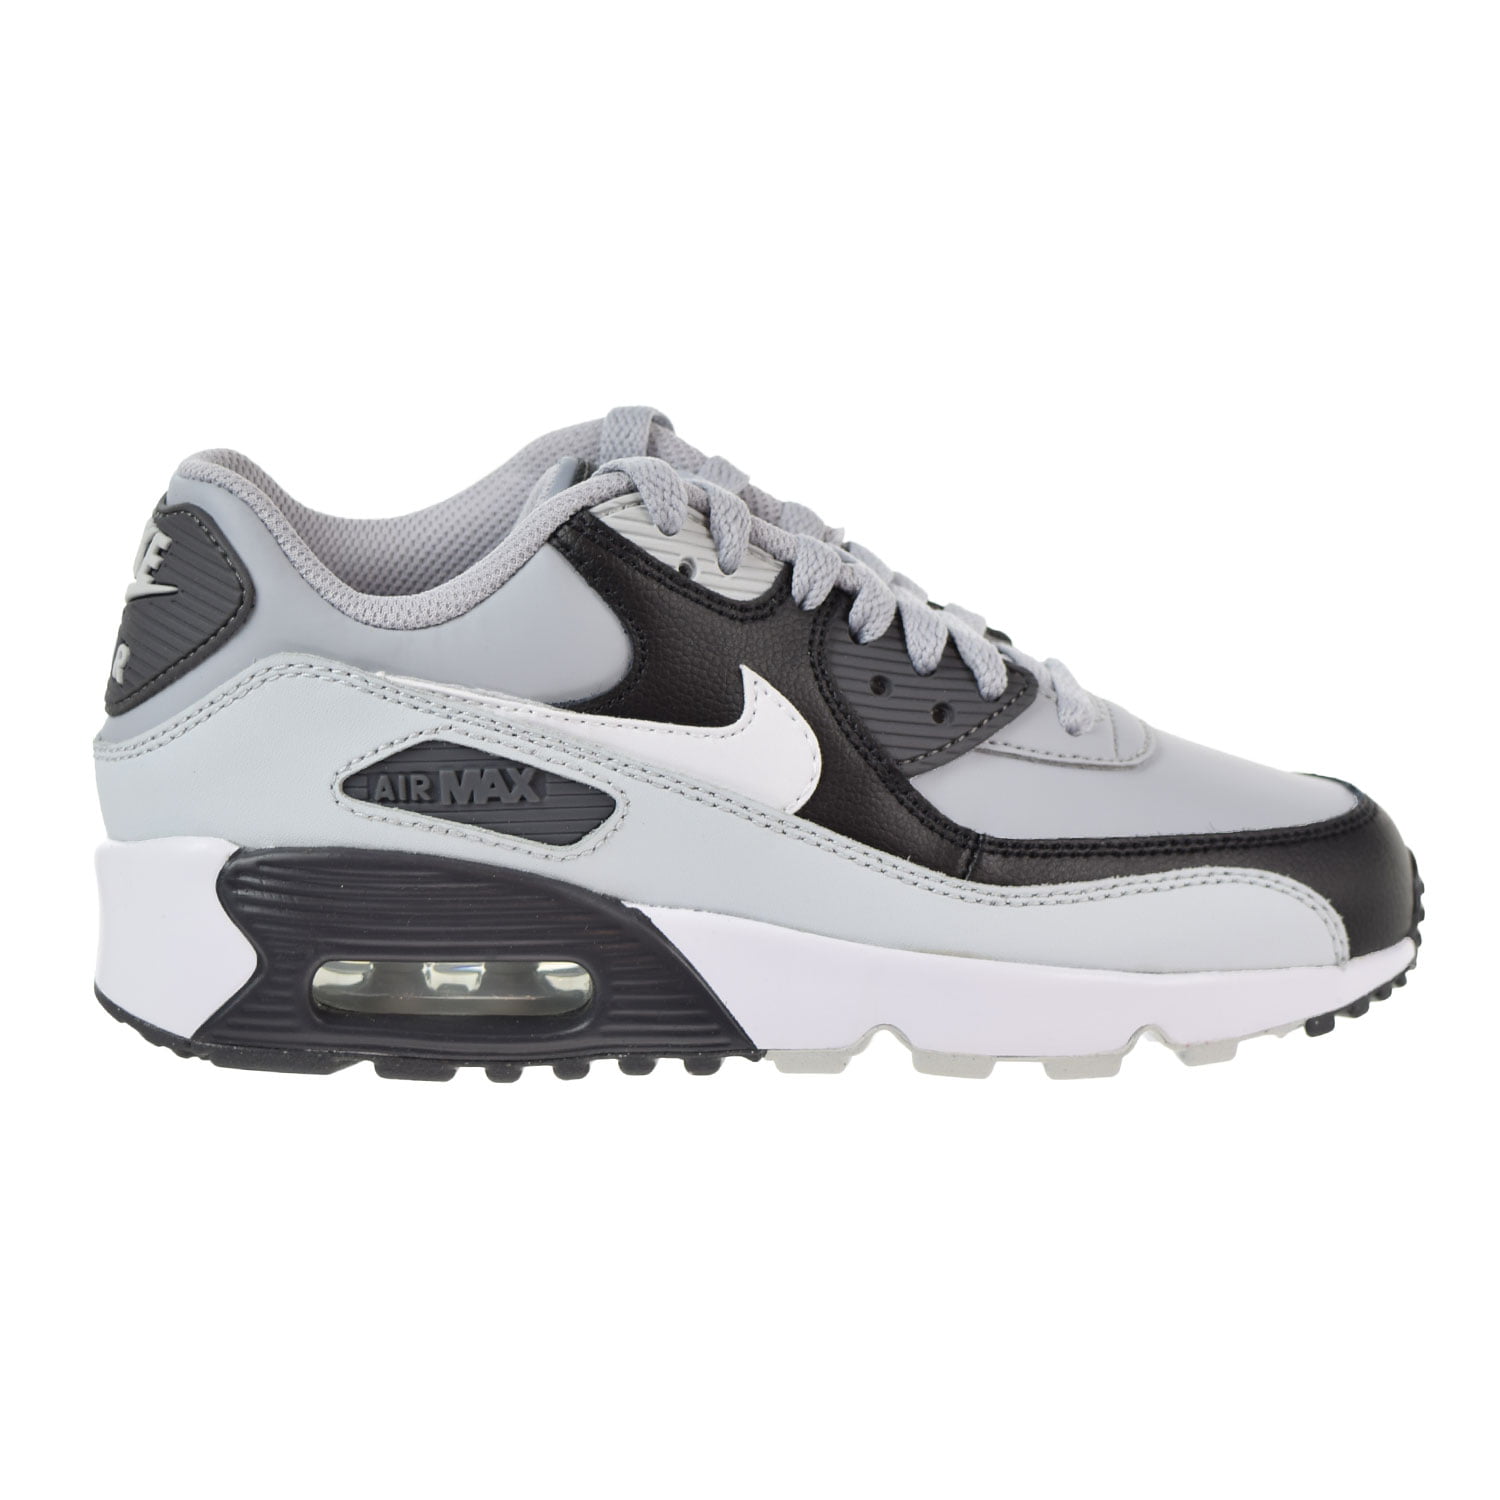 Nike Air max 90 Leather (GS) Big Kids Shoes Wolf Grey/White 833412-016